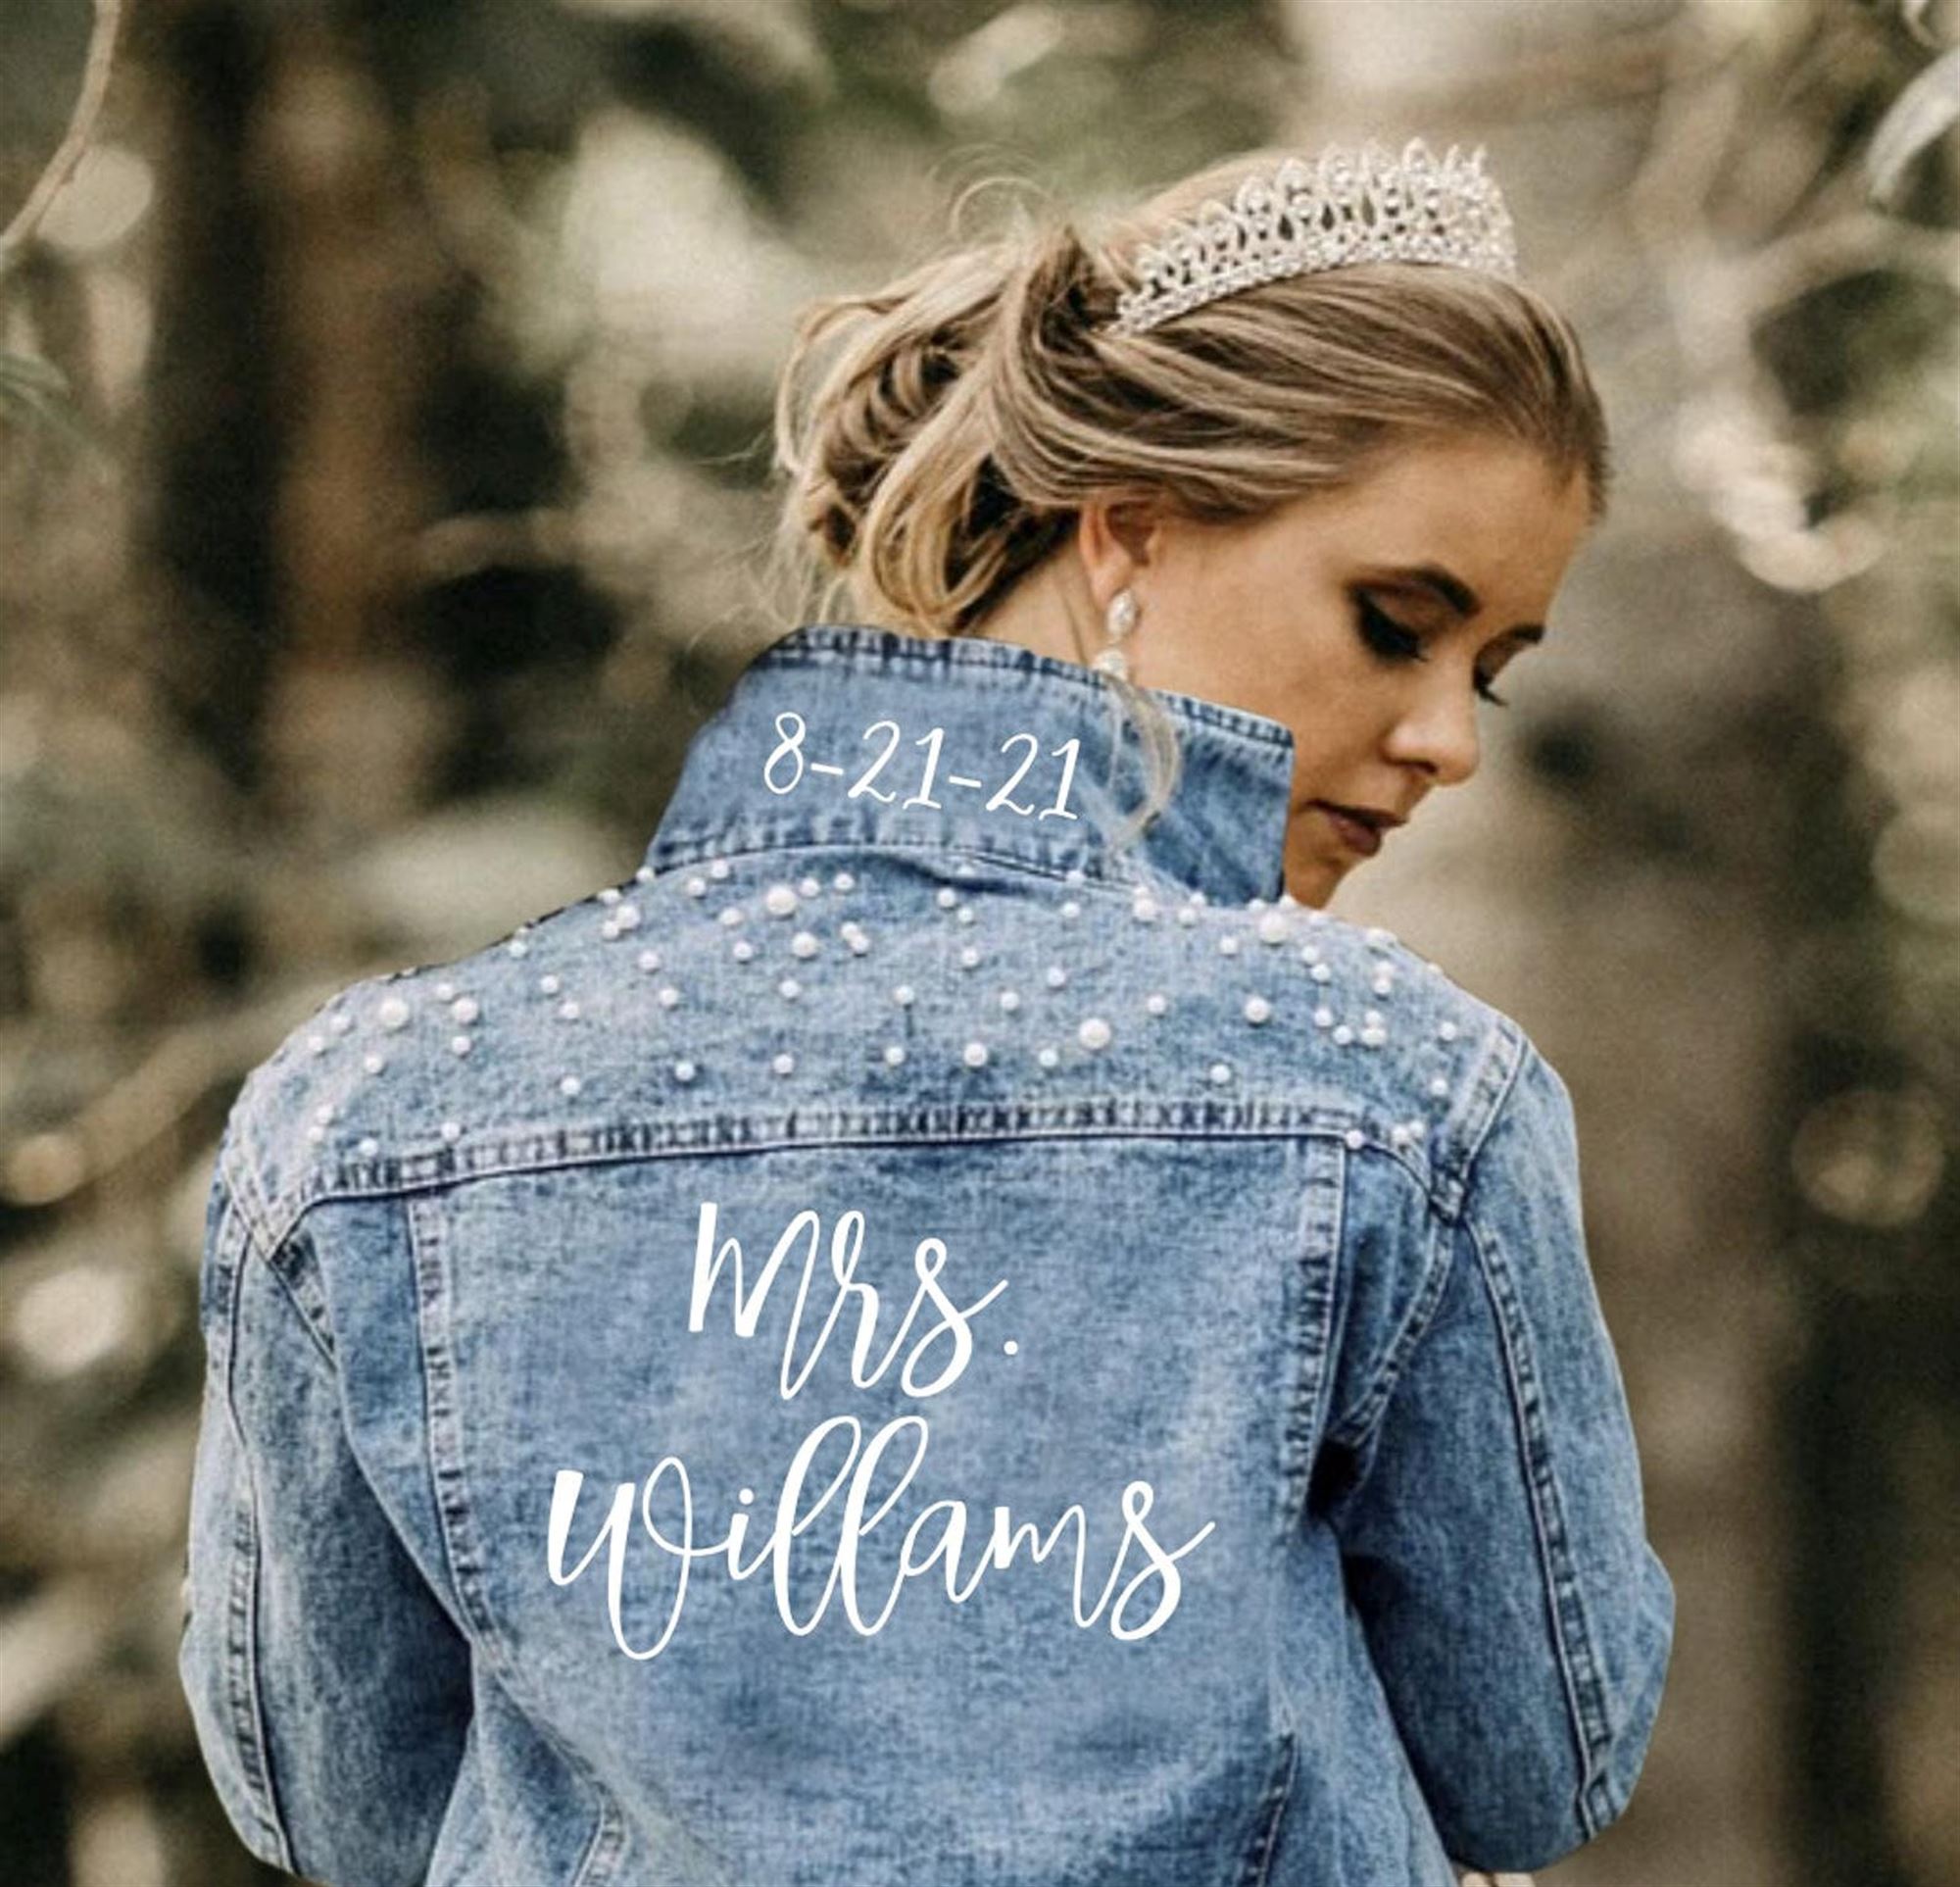 Happy Bridesmaid Gift Bride Pearl Jean Jacket Bridal Party Shower Favor Wedding Party Favors Engagement Party Gift Custom Mrs Bride Gift 